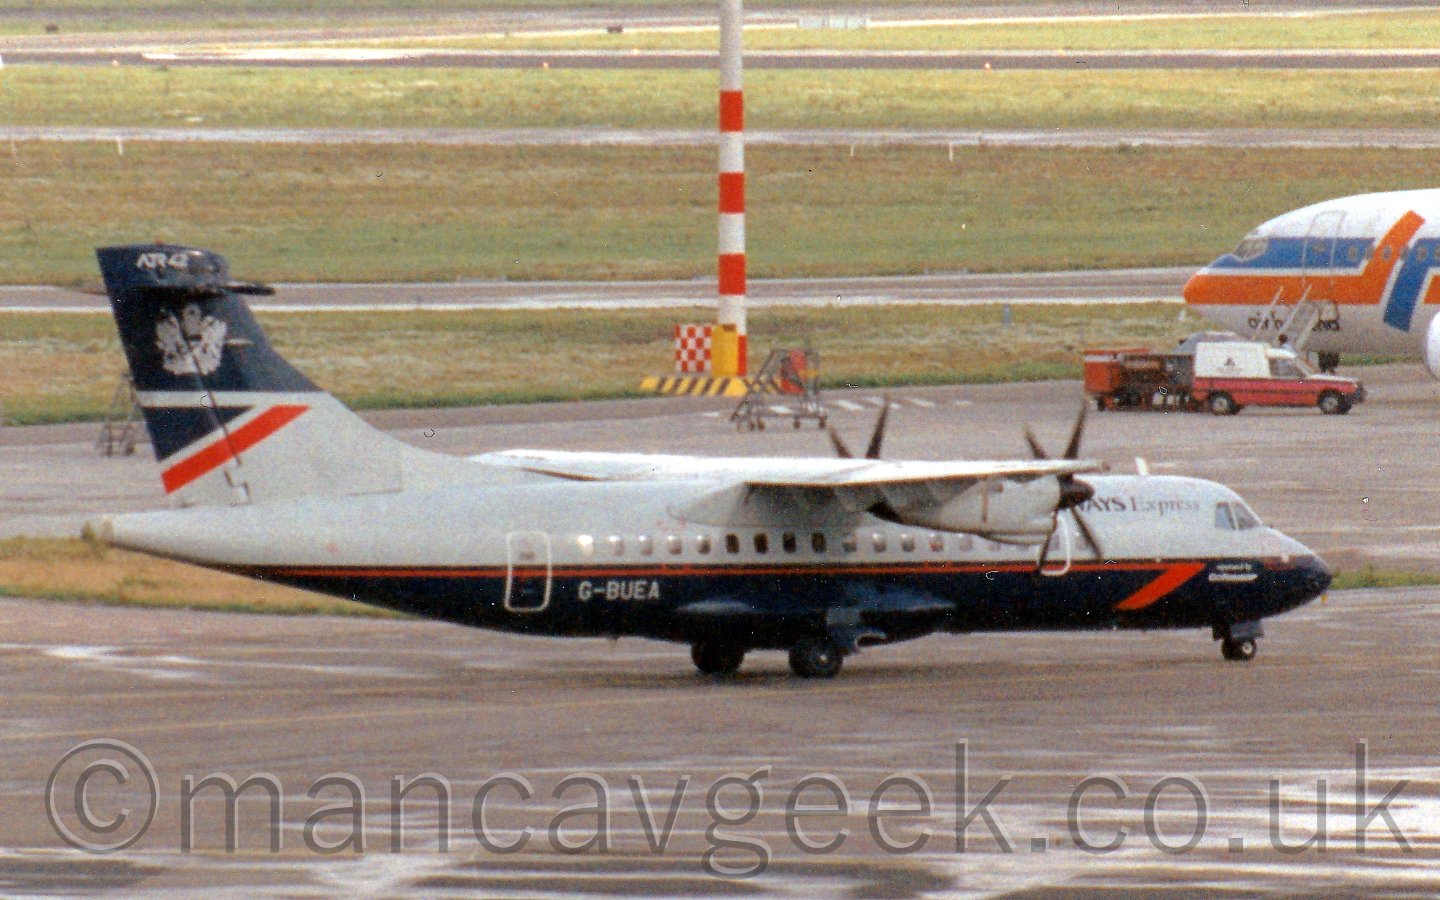 Side view of a T-tailed, high-winged, twin propellor-engined airliner taxiing from left to right. The plane is mostly a dark grey, with a deep blue belly with a thin red stripe running along the body.There are "British Airways Express" titles on the upper forard fuselage, partially obscured by the engines. The tail is grey at the bottom, with a dark blue top, with a dark blue traingle and diagonal red stripe seperating the 2 sectionswith a Royal crest on the top half, and "ATR42" titles right at the top. In the background is a lighting pole with a red and white banded base, and the nose of a larger airliner on the right of the frame, with alternating grass and tarmac areas leading off in to the distance.